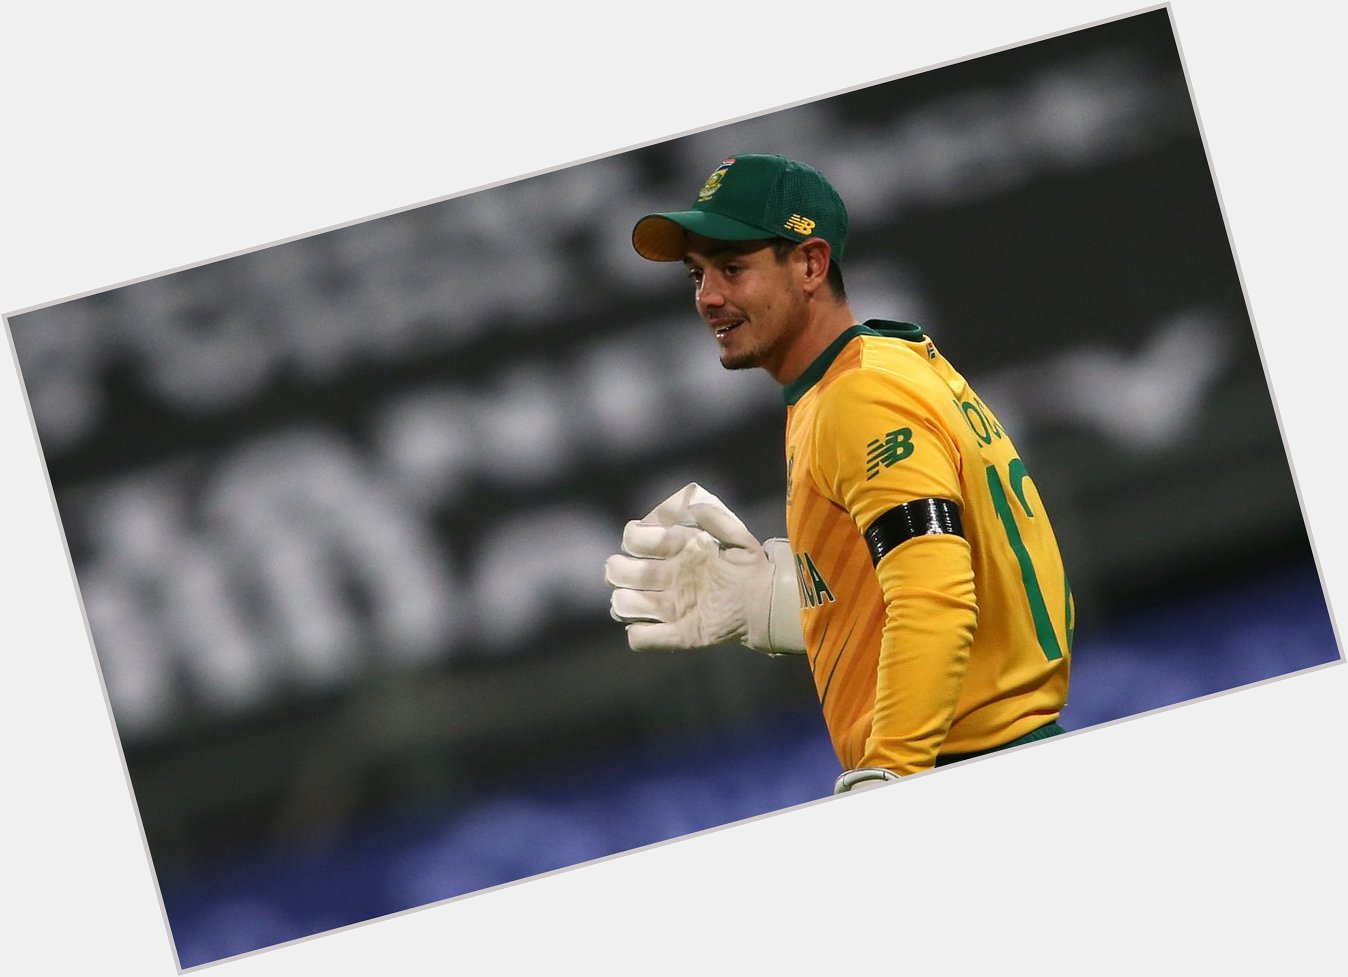 Happy Birthday Cappy Quinton de Kock, to many more years, runs and celebrations together!   